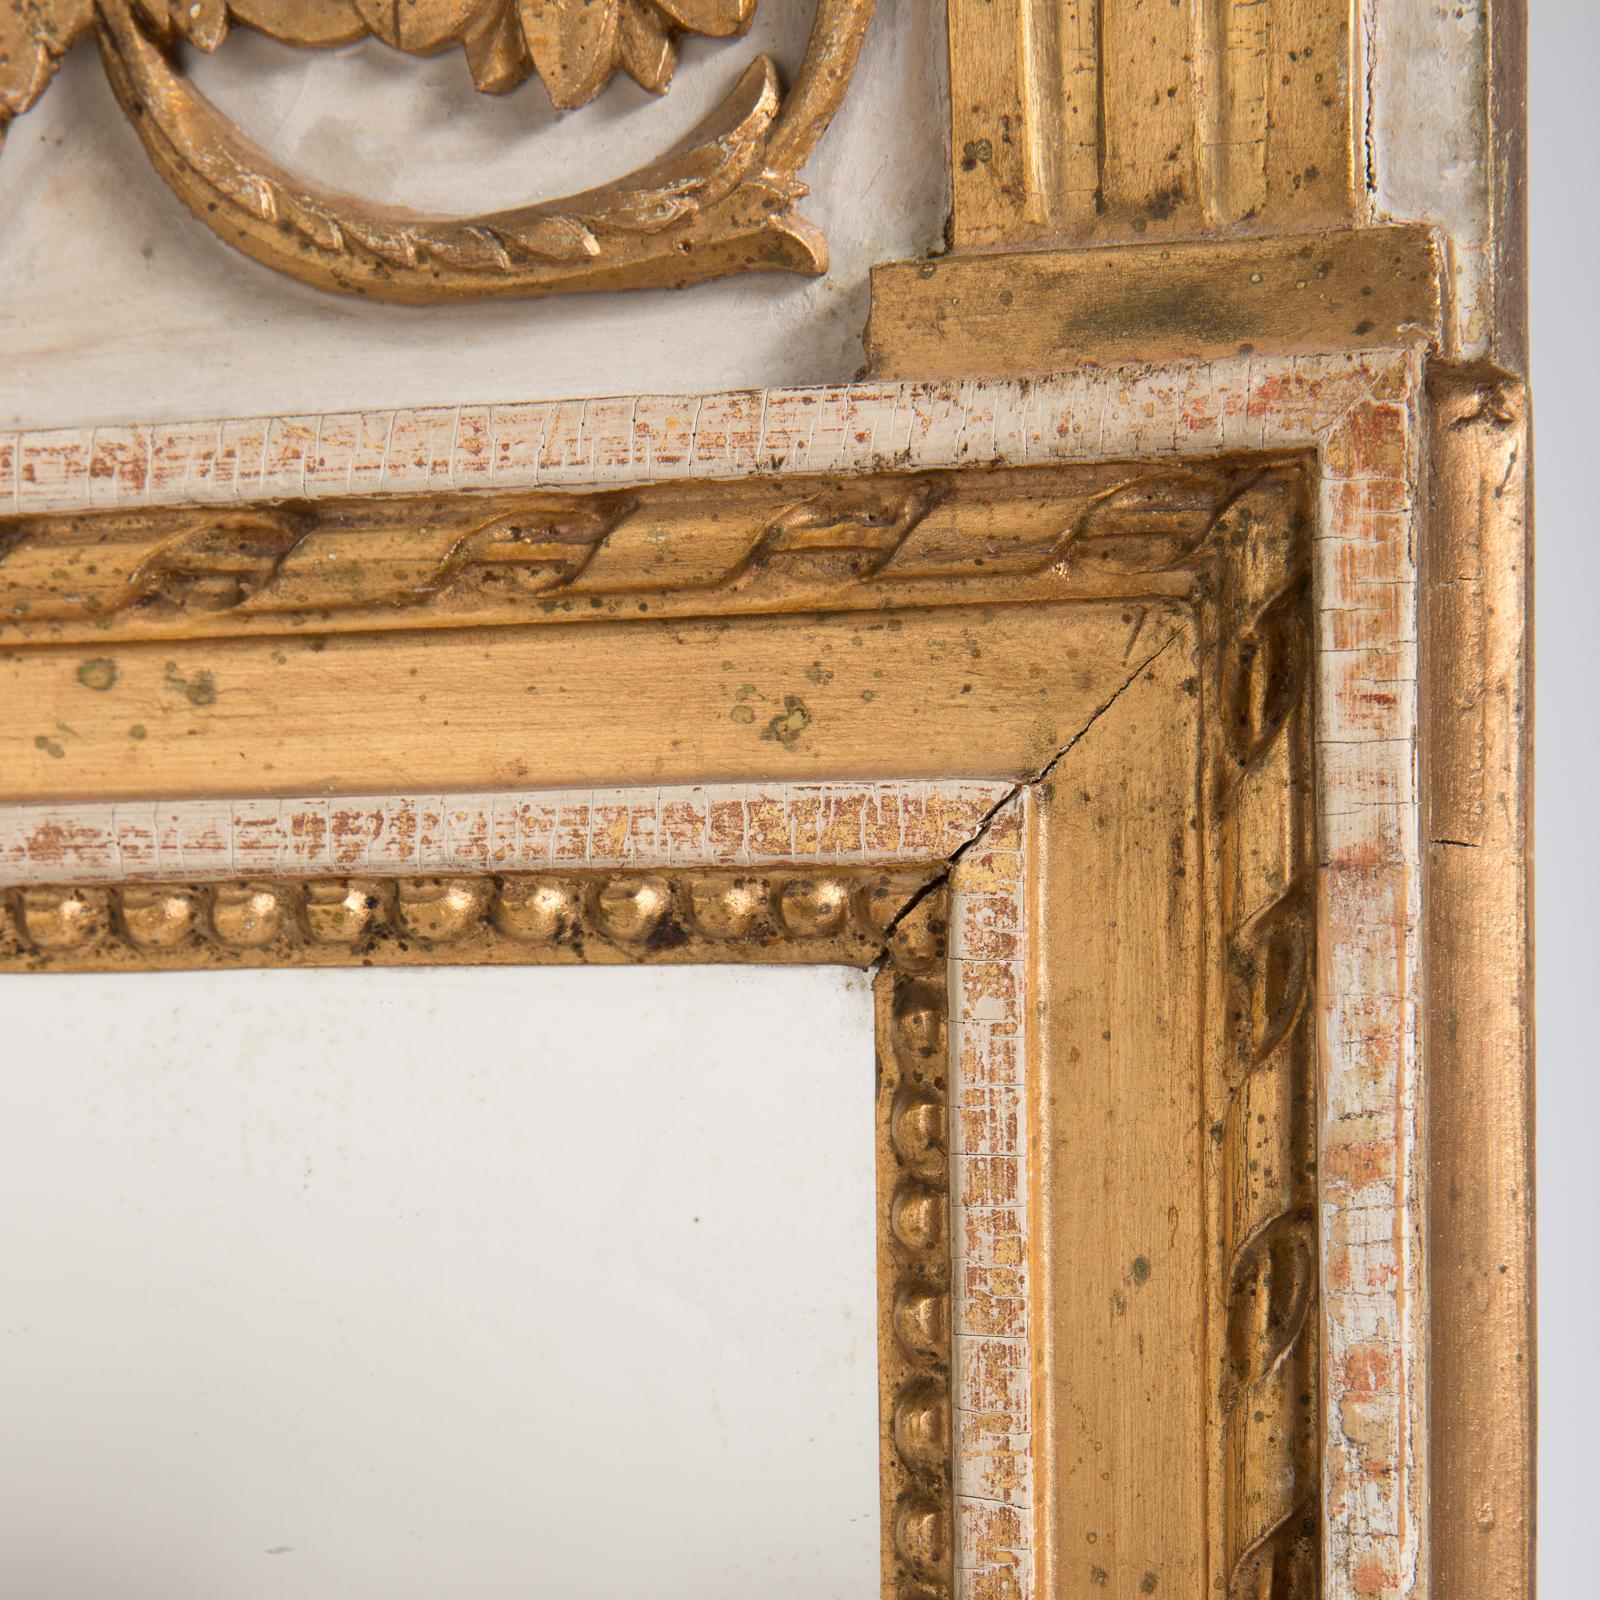 Gilt Swedish Gustavian Period Mirror with Divided Glass, circa 1790 For Sale